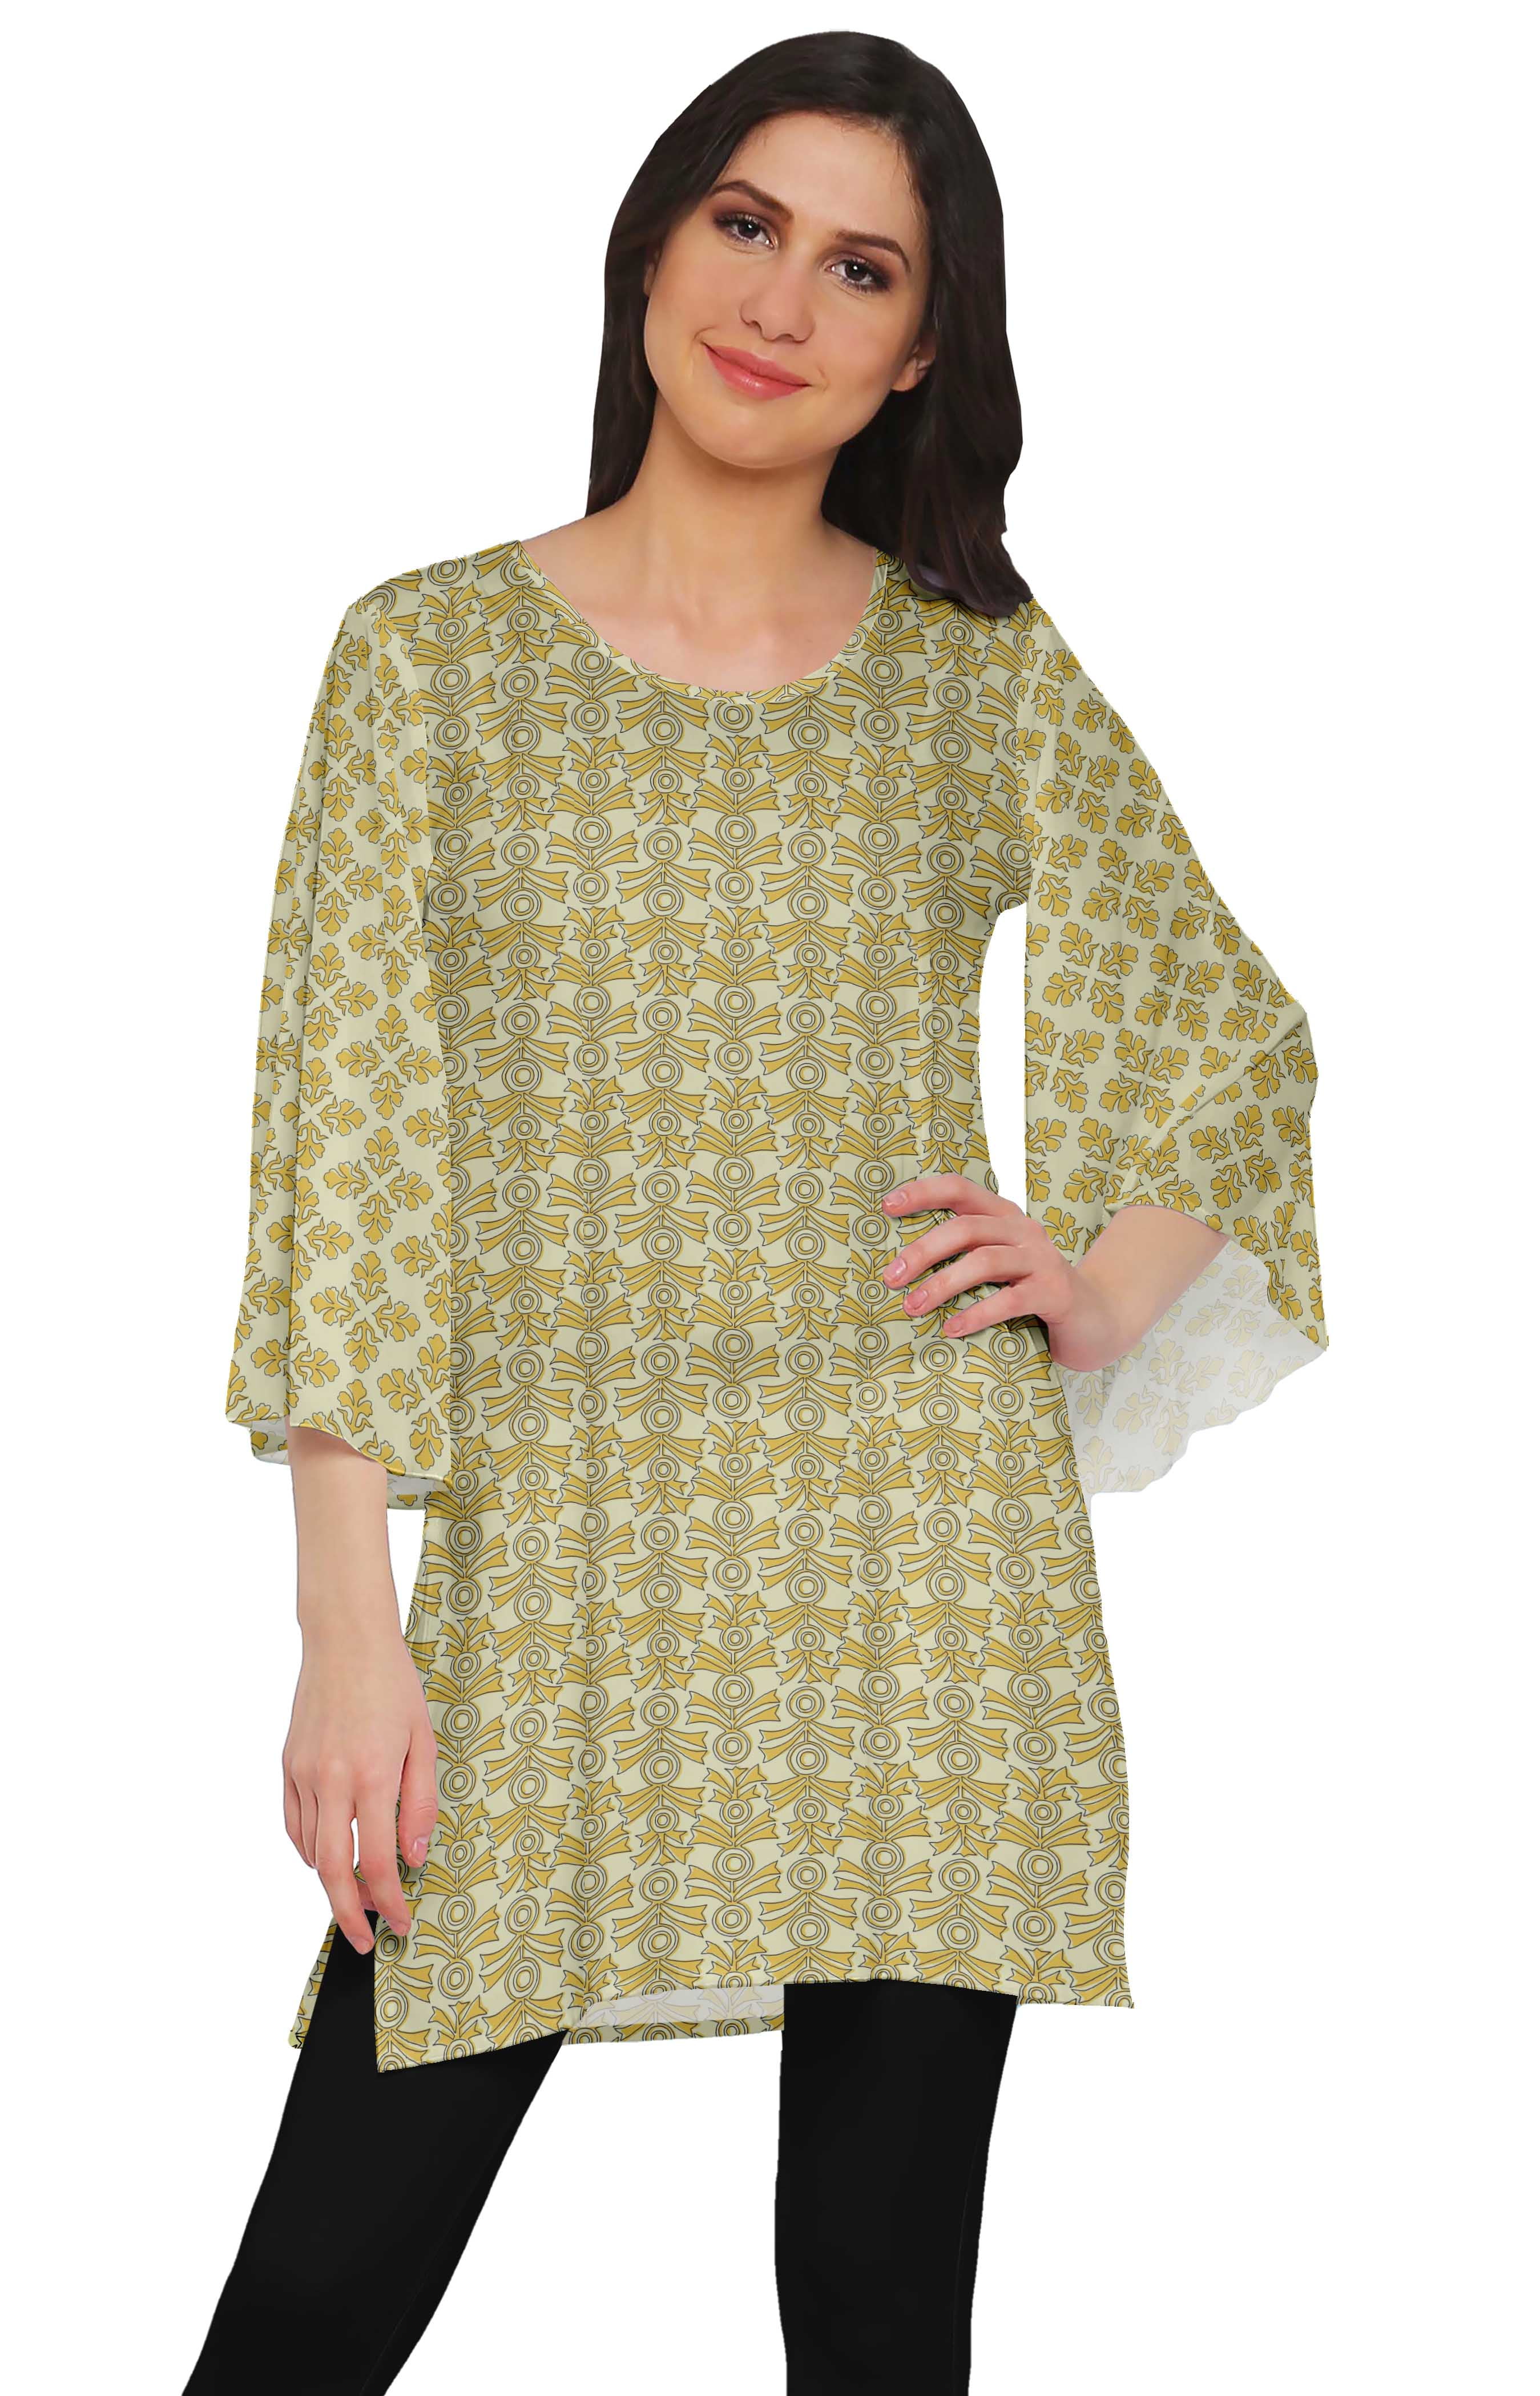 Ladies Round Neck Kurti - Ladies Round Neck Kurti buyers, suppliers,  importers, exporters and manufacturers - Latest price and trends